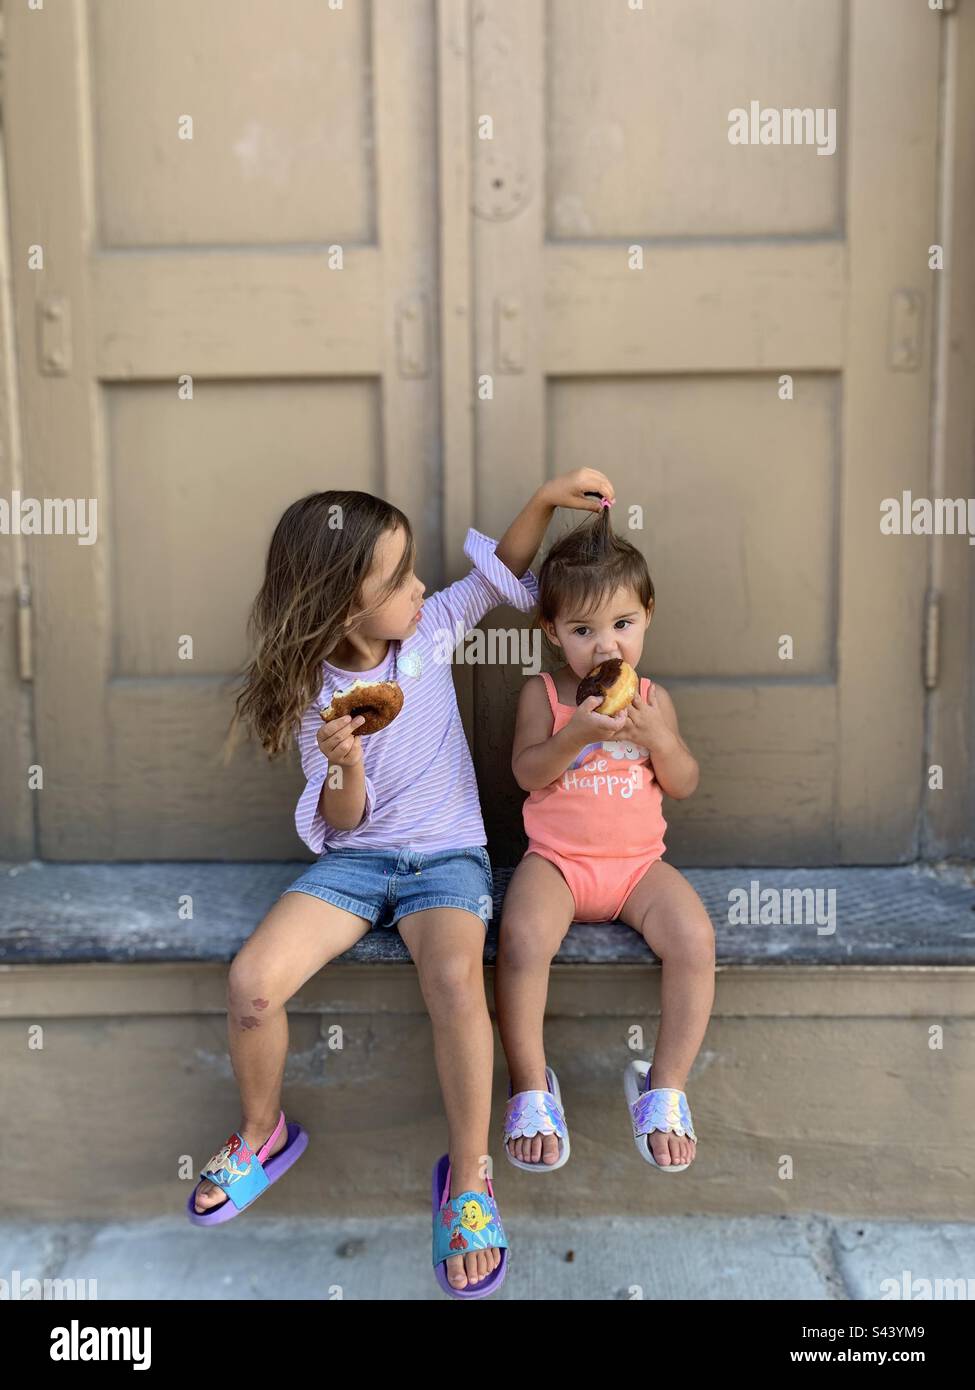 Cheeky girls eating donuts on doorstep. One is playing with the other’s hair. Stock Photo